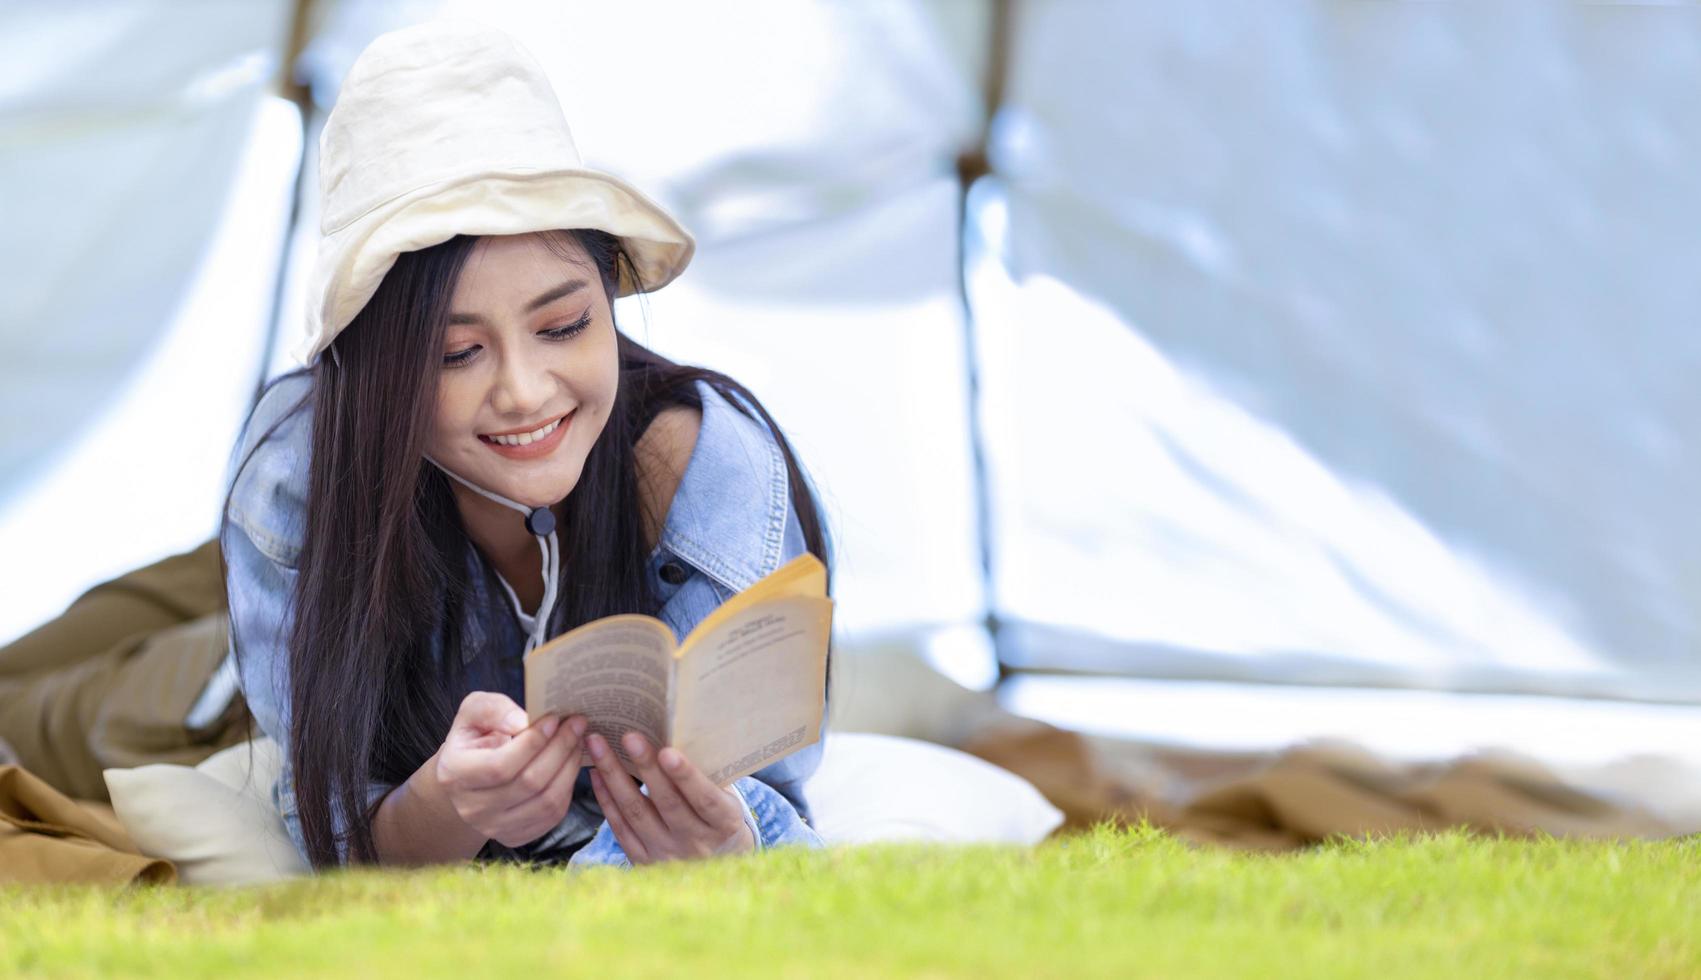 Asian woman is reading a book in her tent while camping outdoor during summer time in national park for adventure and active travel concept photo